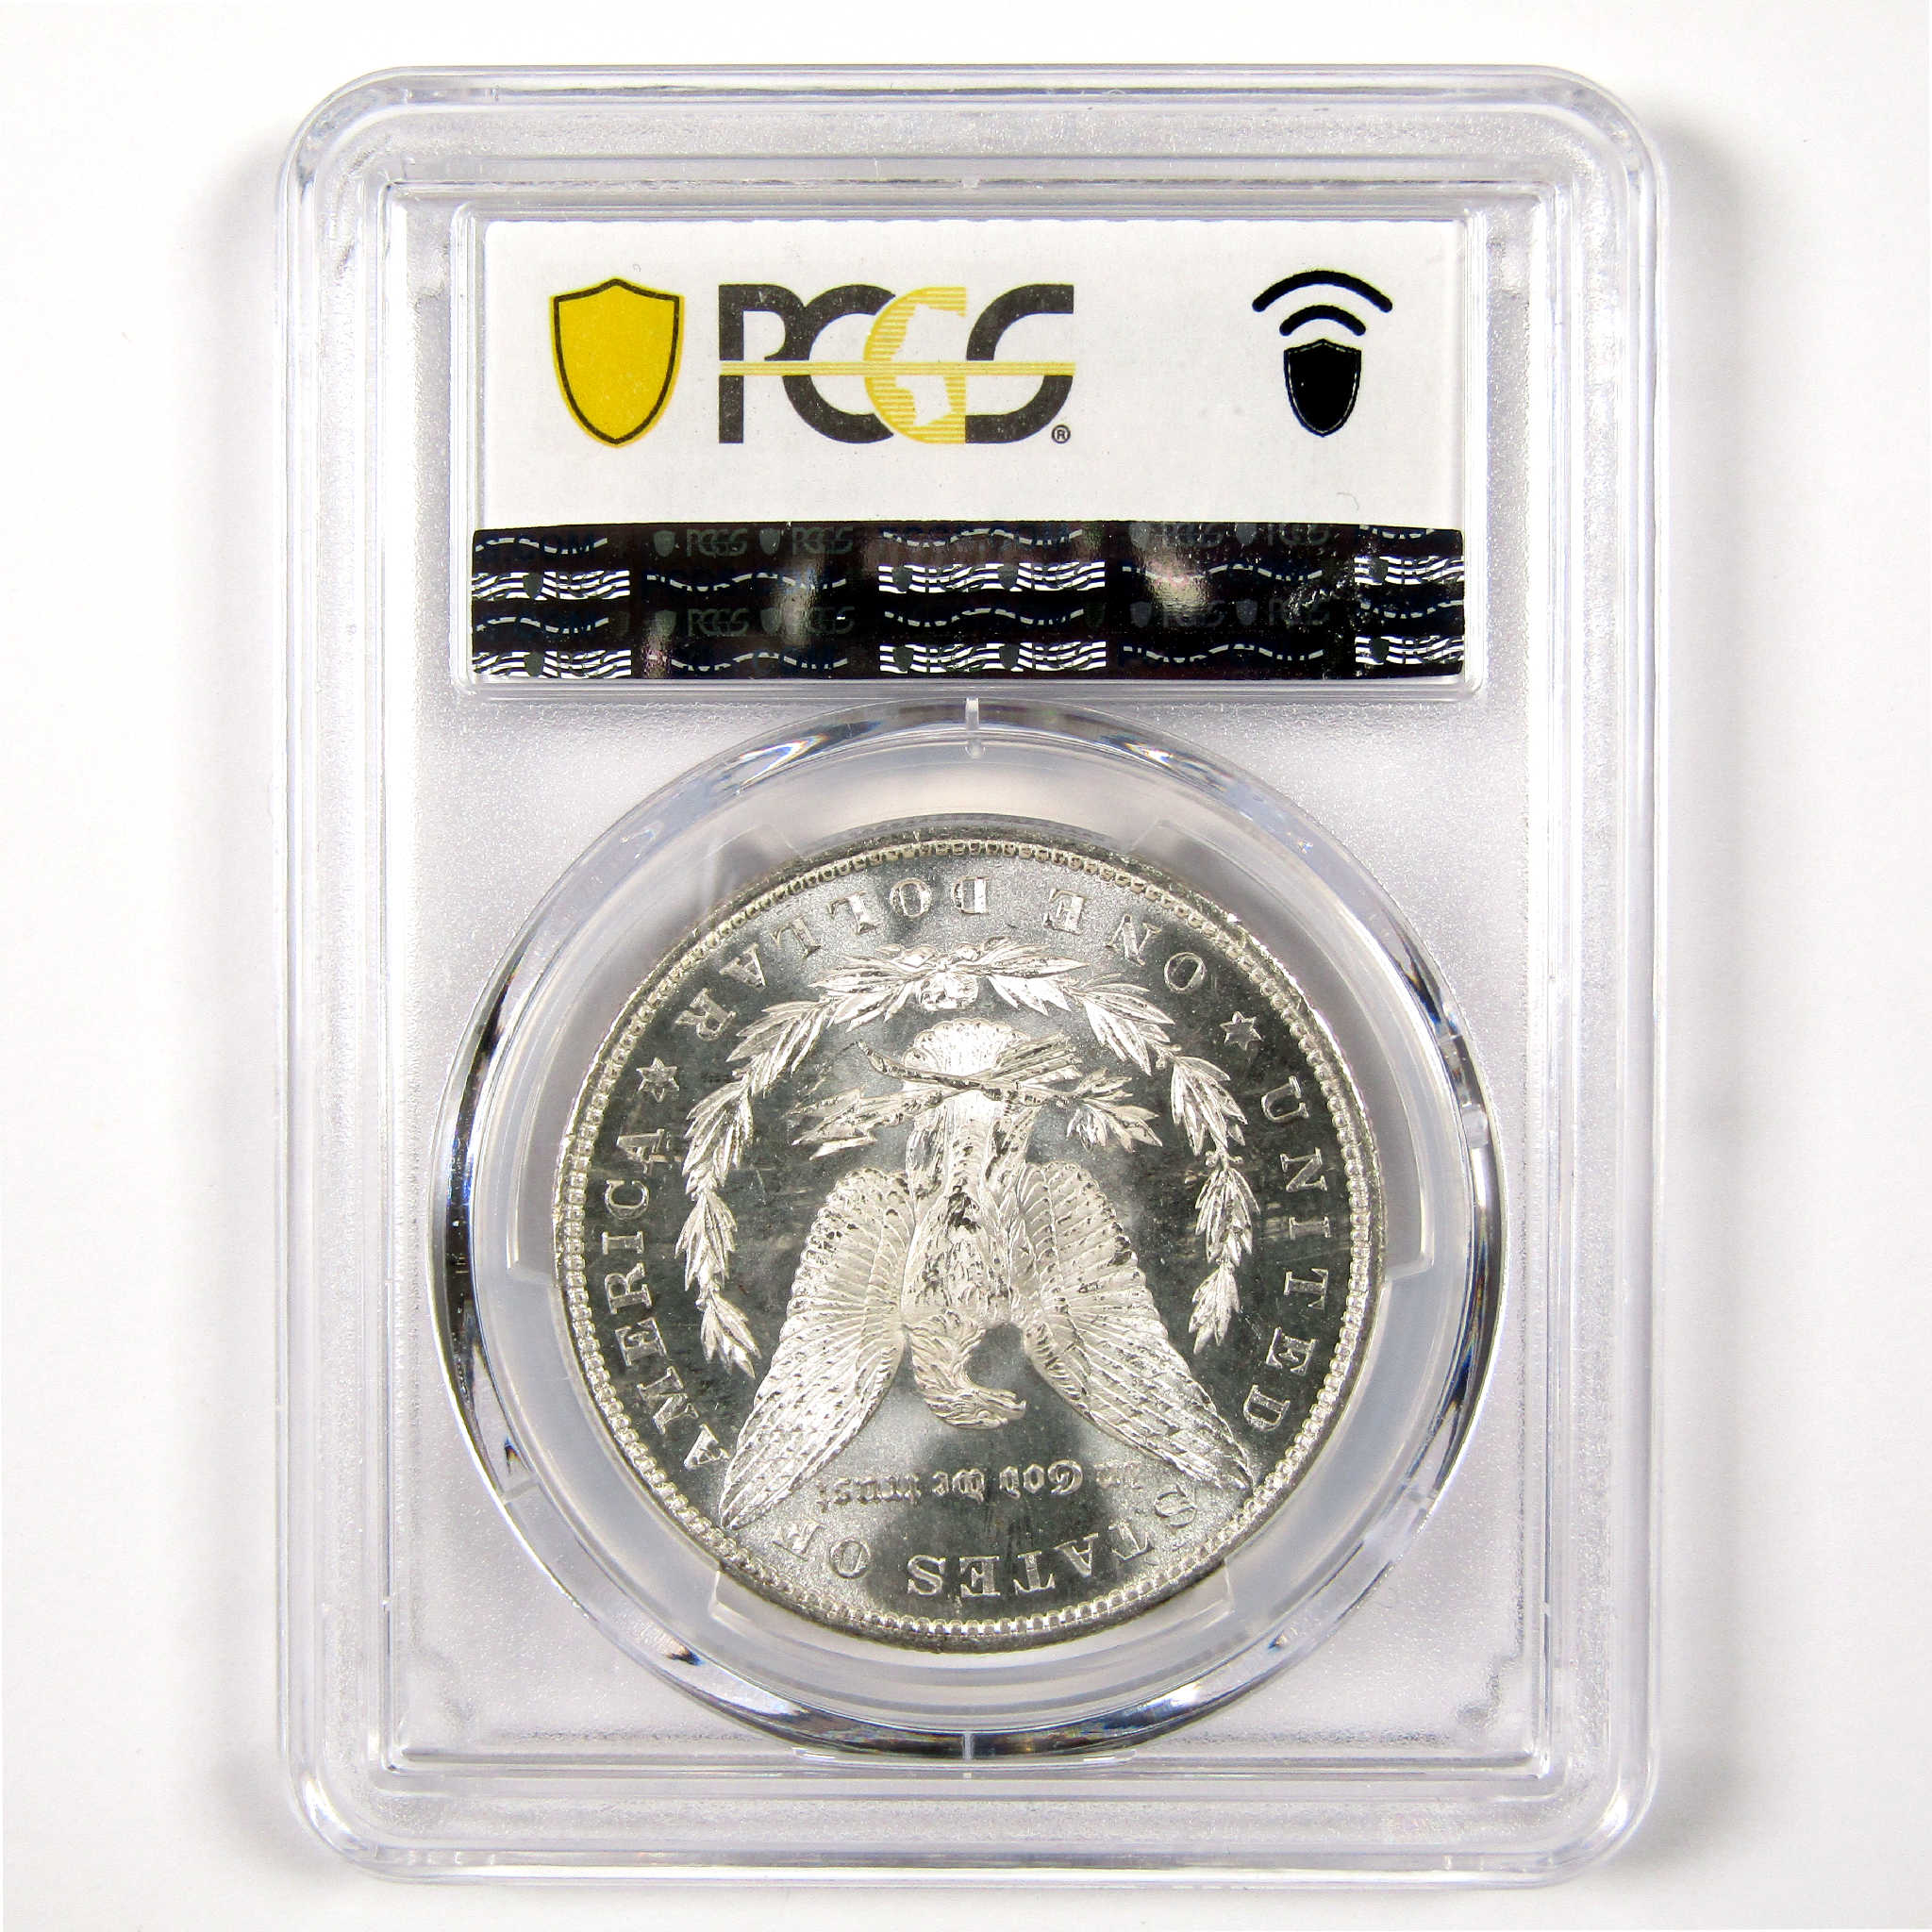 1878 7TF Rev 79 Morgan Dollar MS 62 PCGS Silver $1 Unc SKU:I11310 - Morgan coin - Morgan silver dollar - Morgan silver dollar for sale - Profile Coins &amp; Collectibles